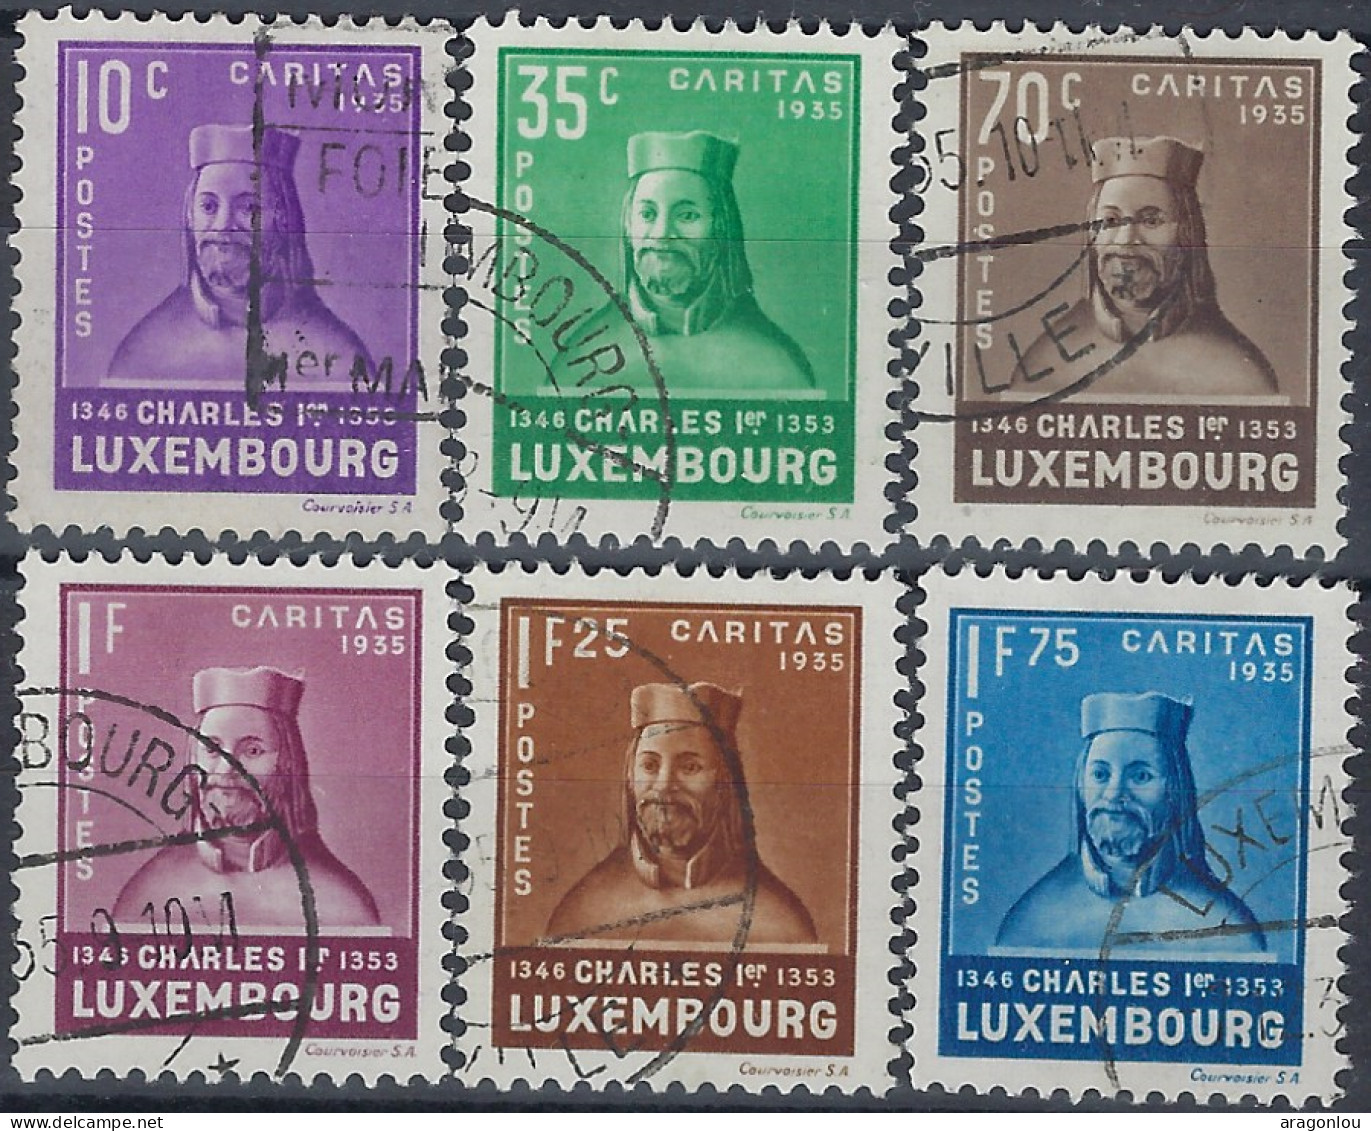 Luxembourg - Luxemburrg - Timbres  1935    Charles Le 1ier     Série   ° - Used Stamps